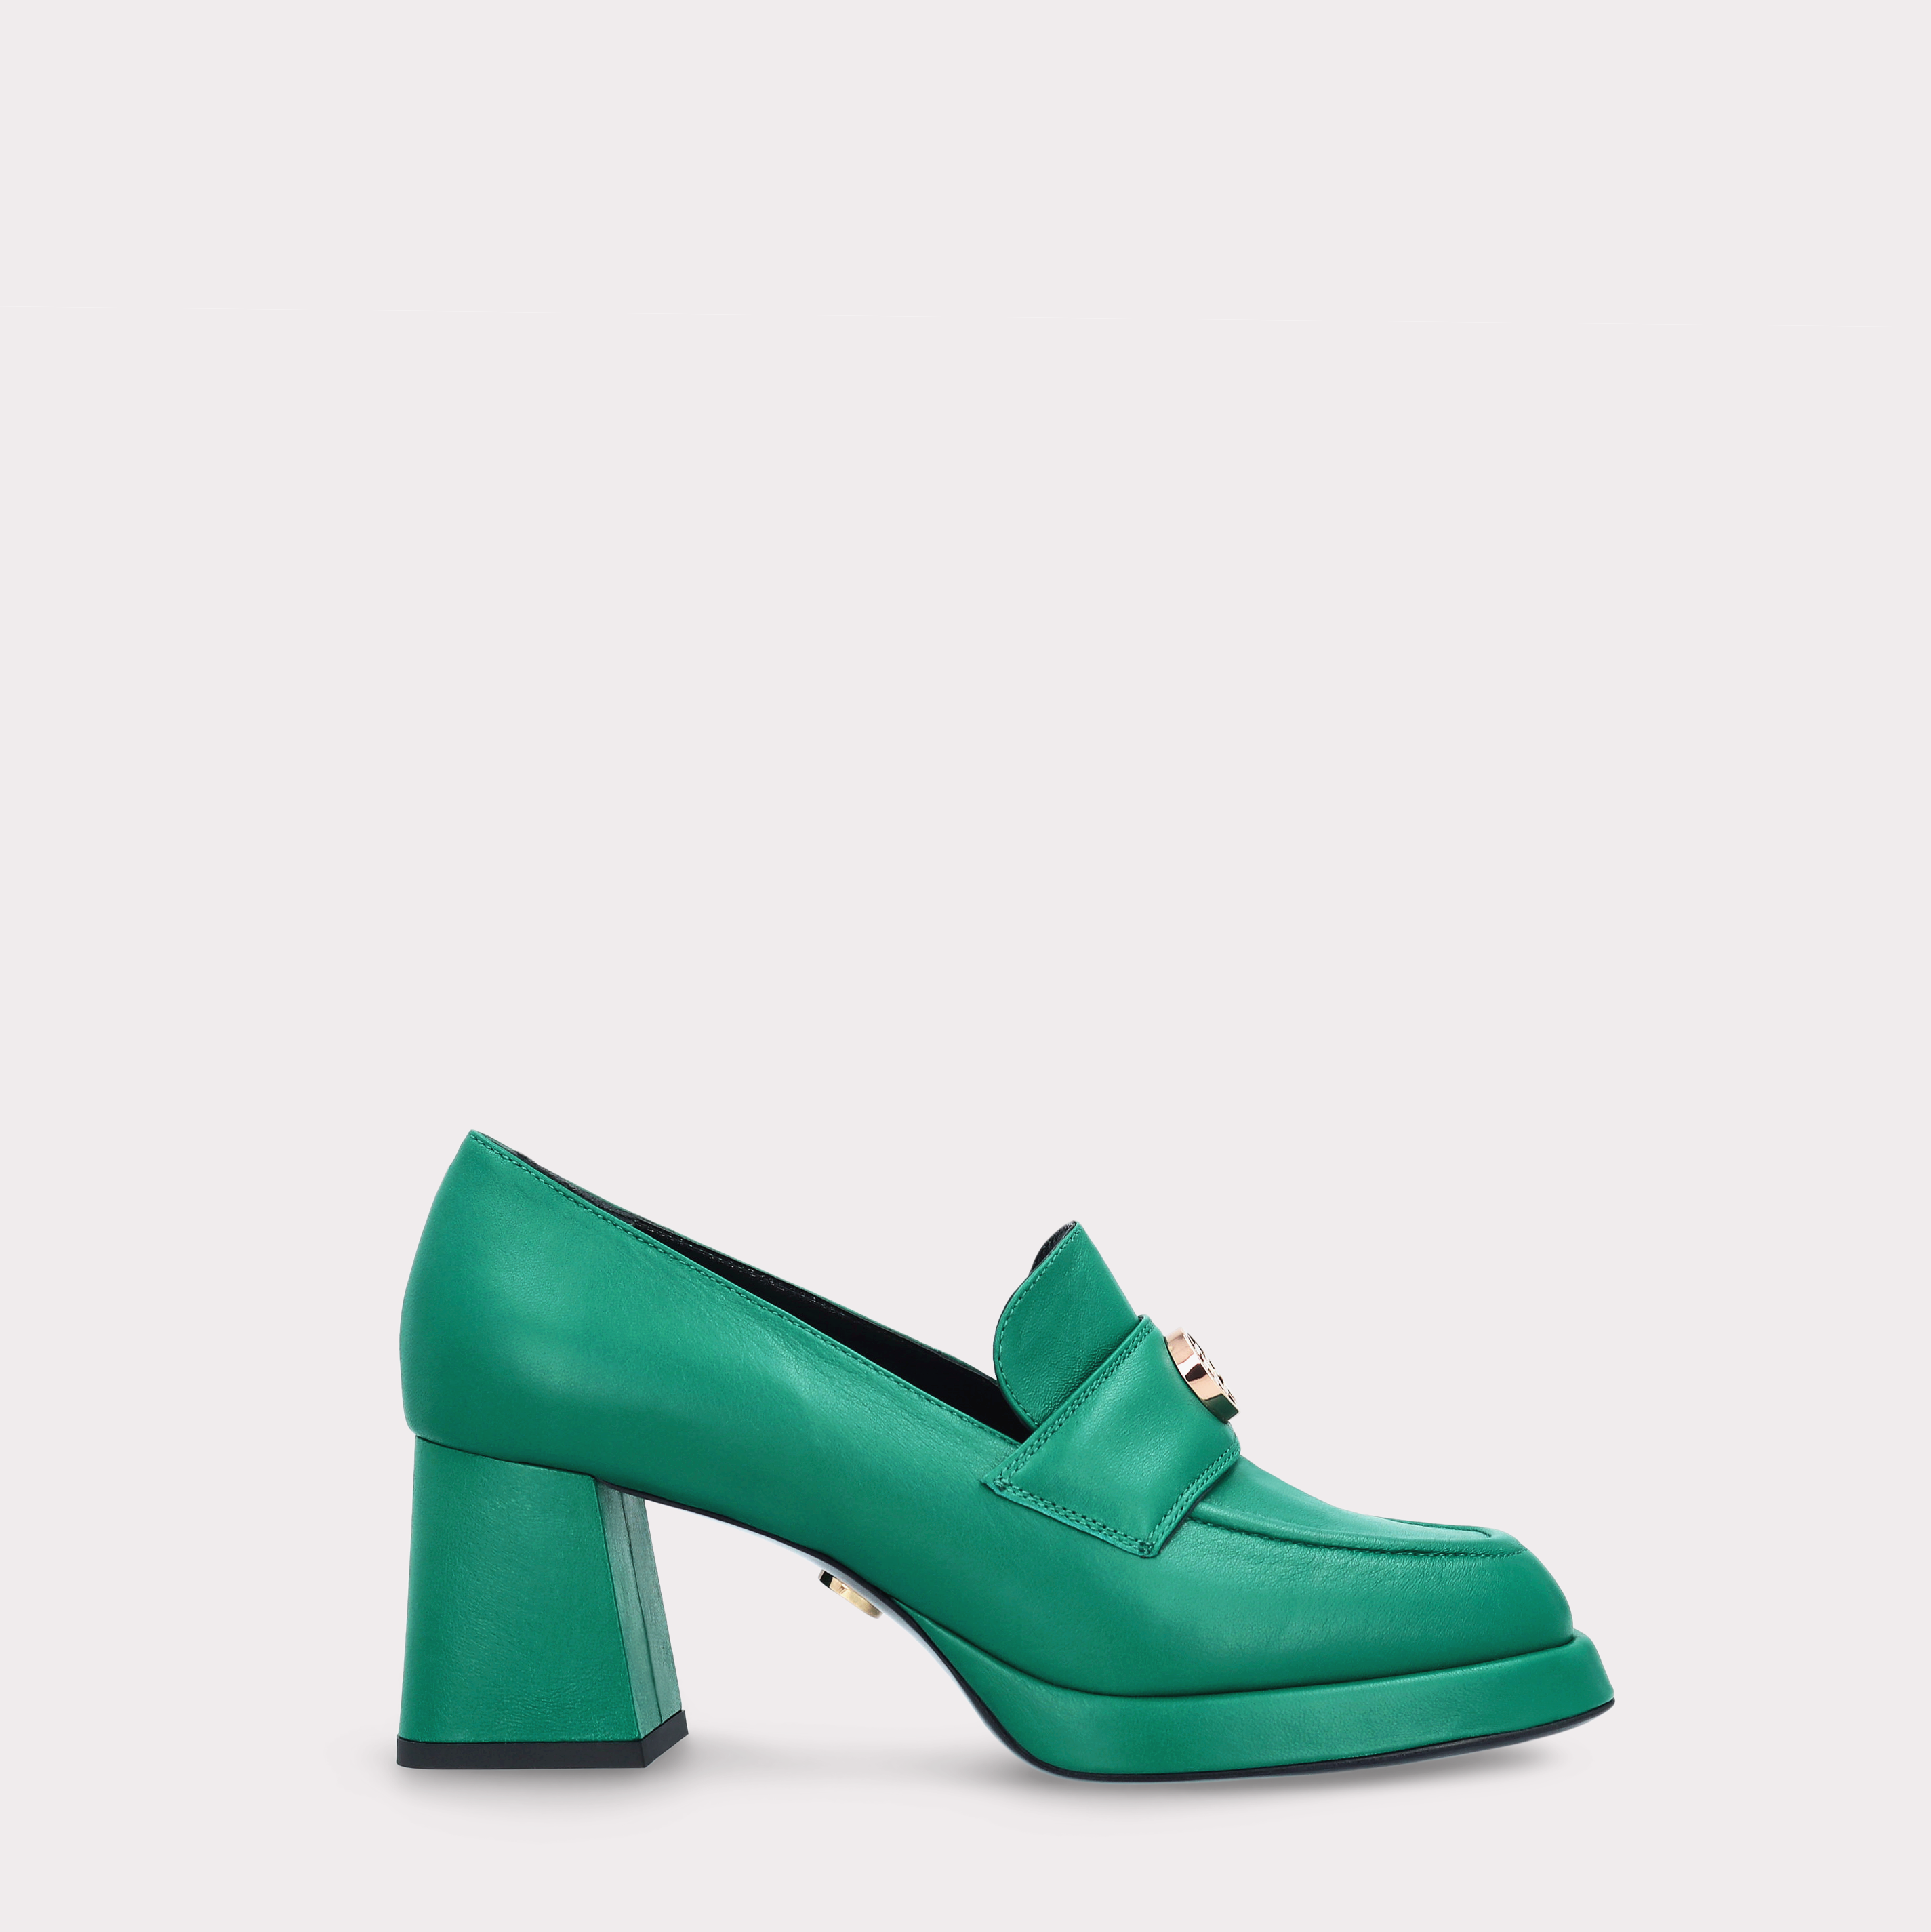 CONNIE MOK 02 GREEN SMOOTH LEATHER PLATFORM PUMPS